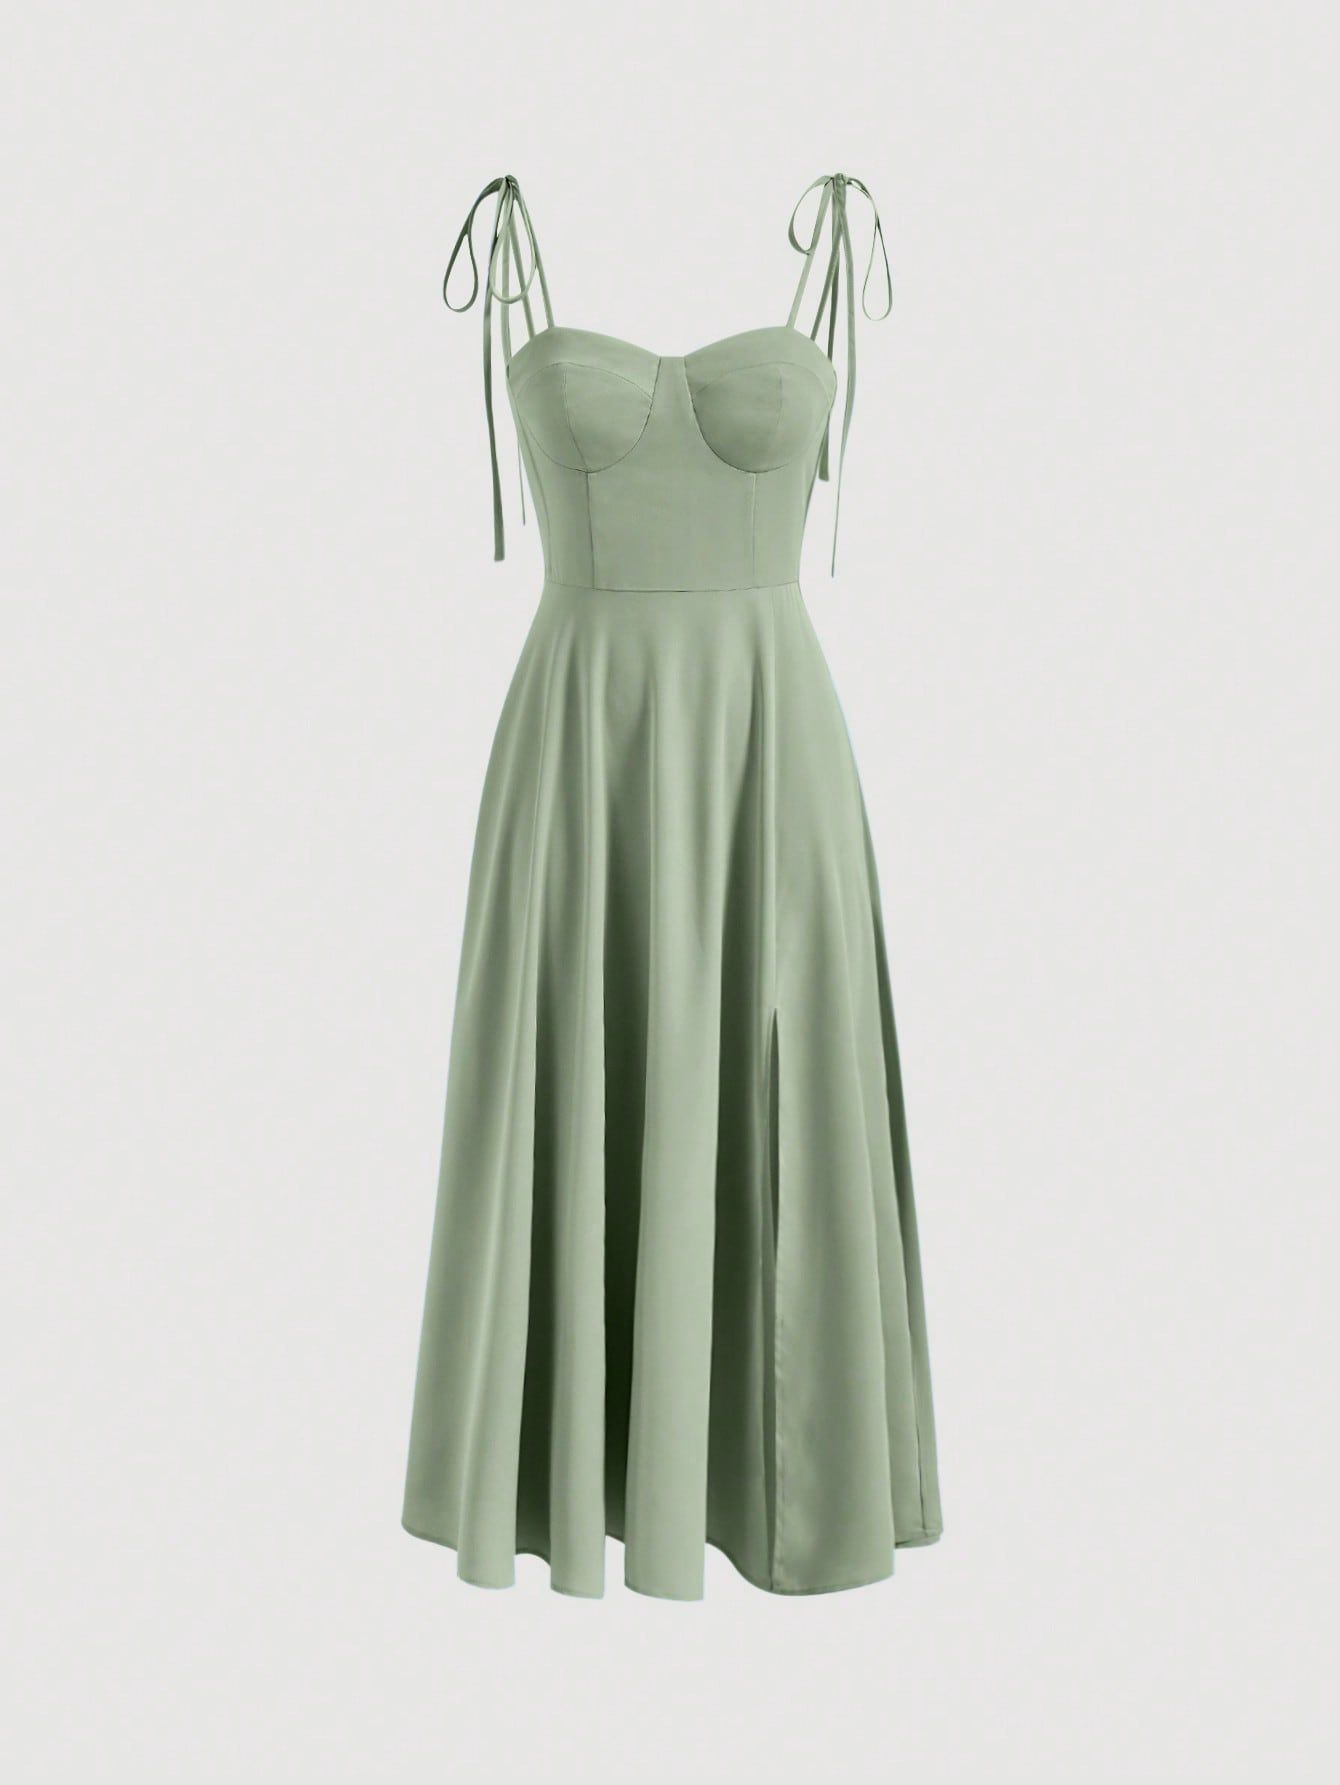 How to Wear Mint Green Dress: Top 15 Refreshing Outfit Ideas